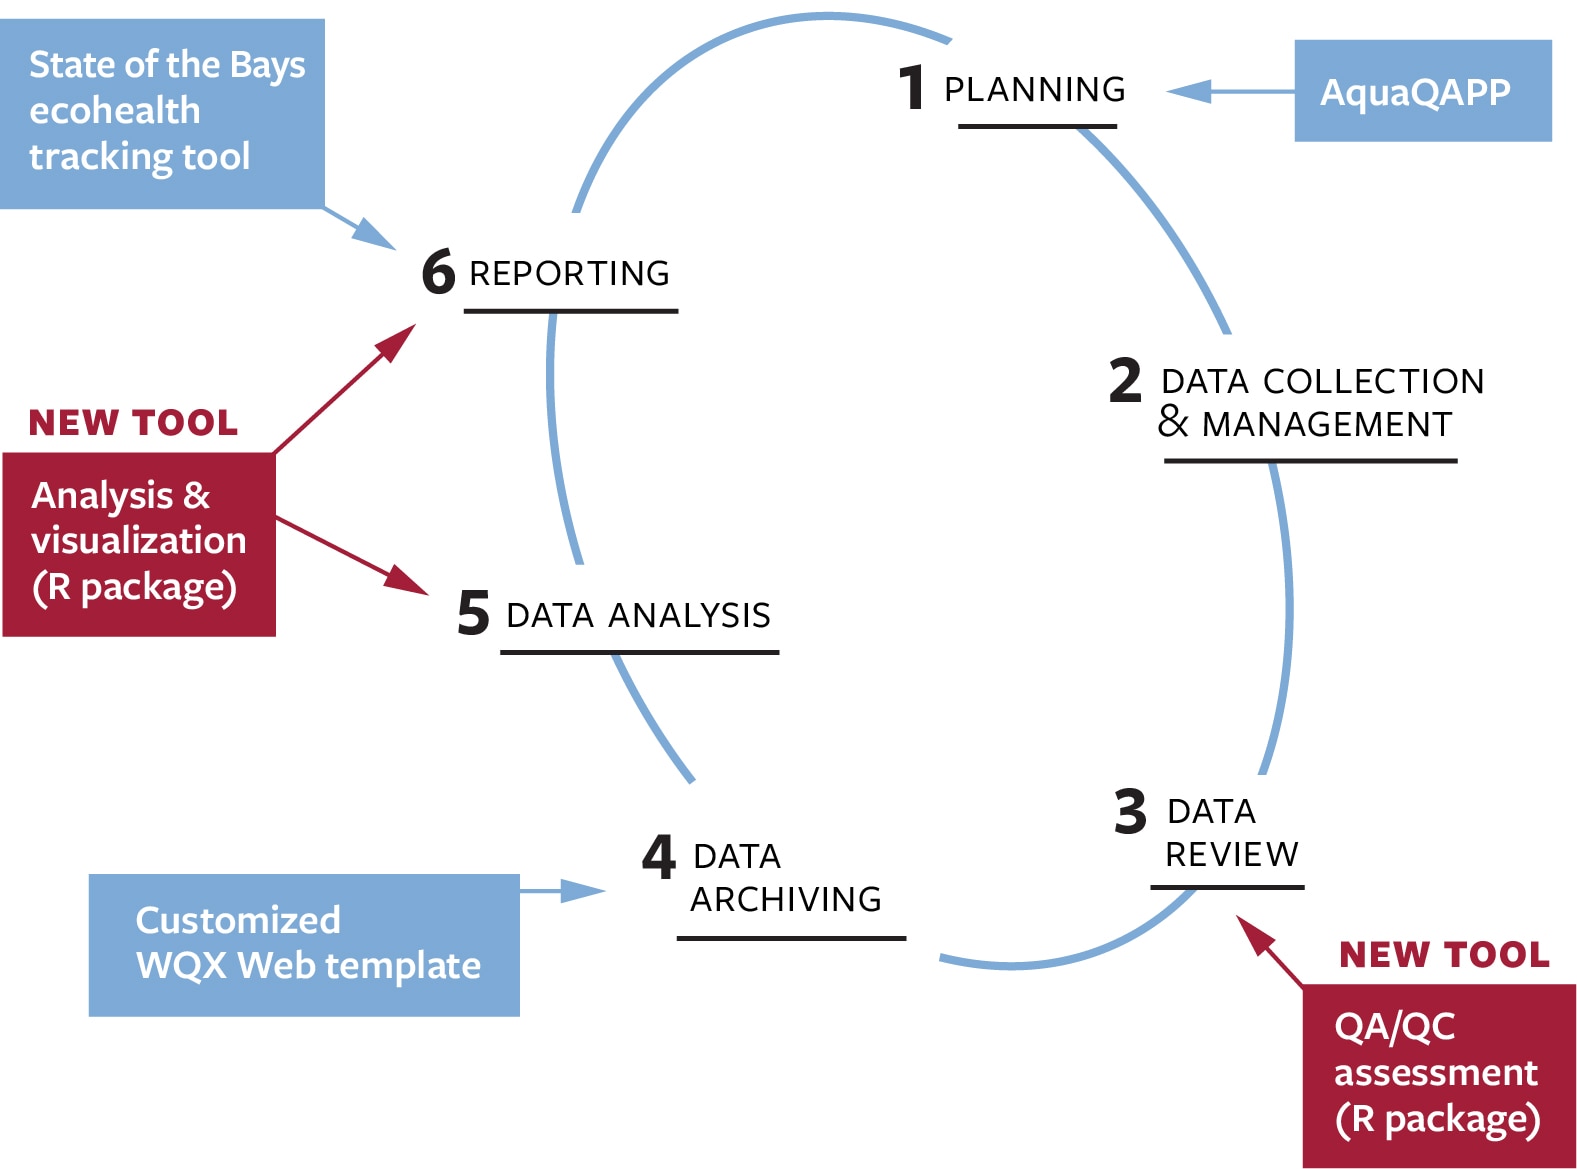 MassBays' EN Projects address the following steps in the Data Management Cycle: Planning (AquaQAPP), Data Review (R package), Data Archiving (Connections to EPA data portal WQX), Data Analysis (R package), and Reporting (R package, Ecohealth Tracking Tool) 